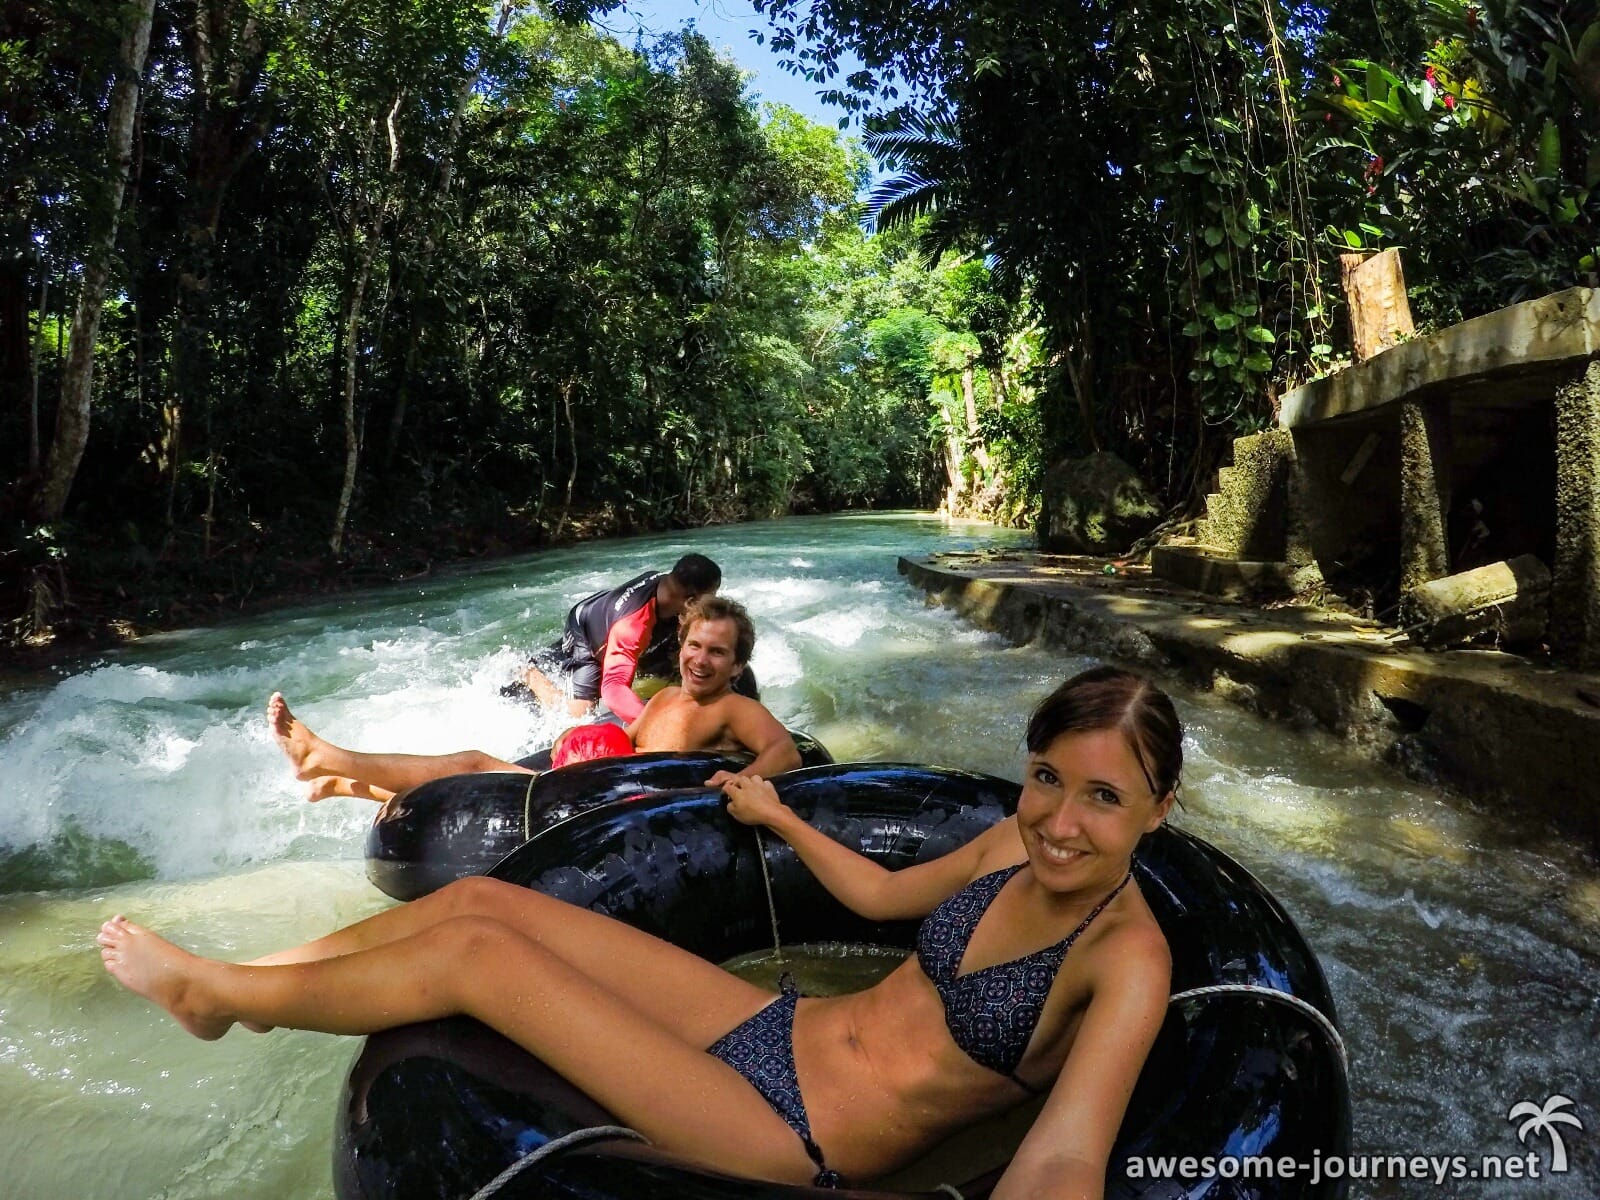 The best rafting tours in jamacia with www.jamescarvertours.com